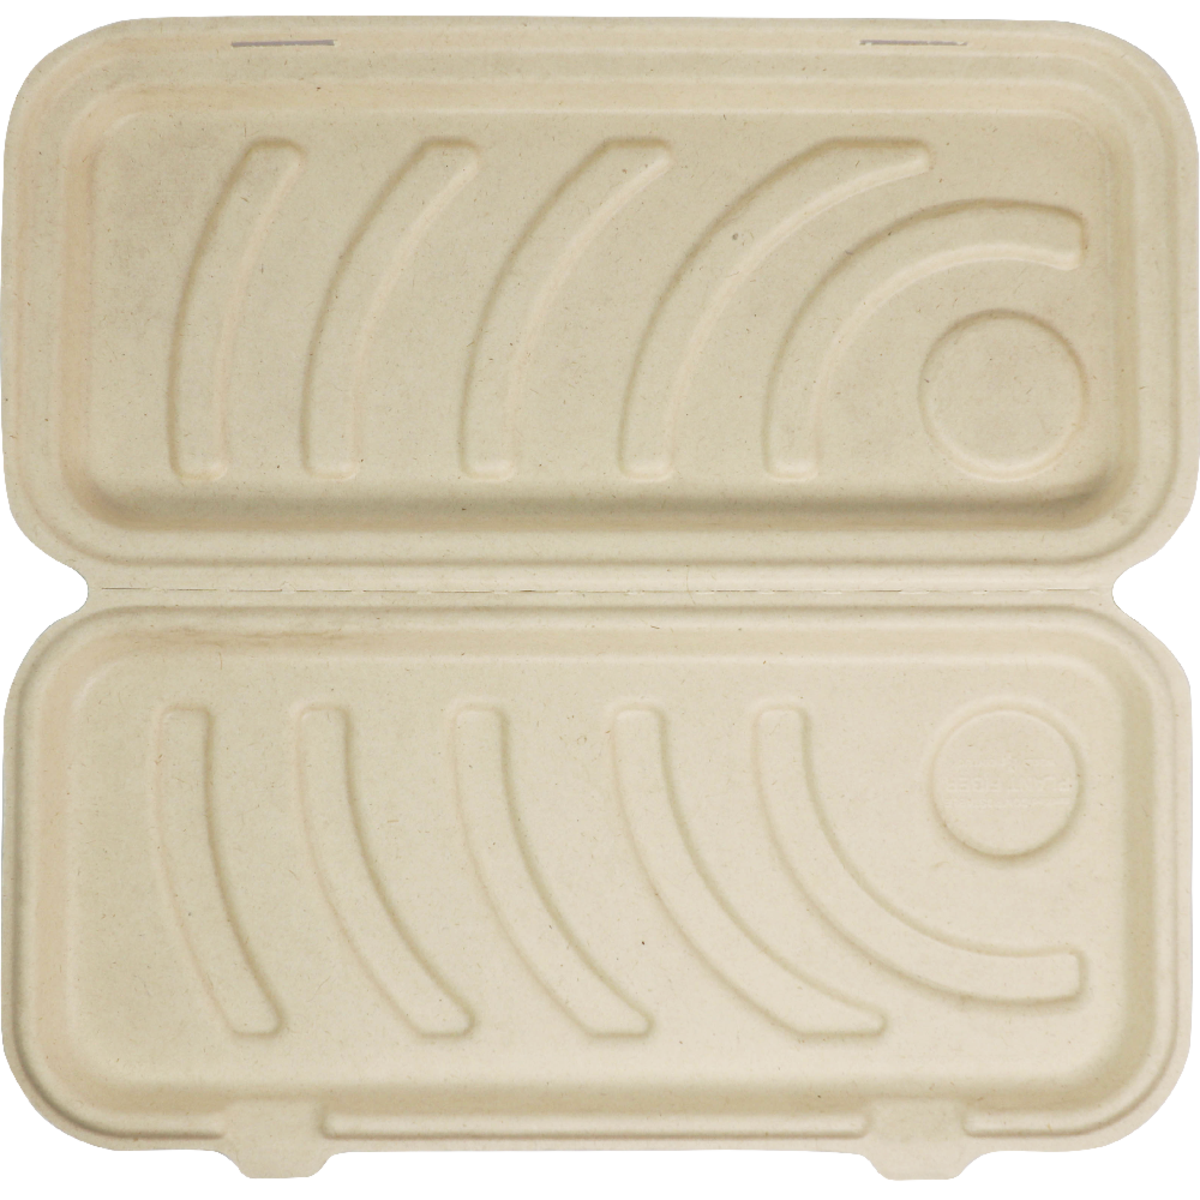 Bag Tek Rectangle White Plastic Medium Sandwich and Snack Bag - Heat Sealable - 8 3/4 inch x 6 1/2 inch - 100 Count Box